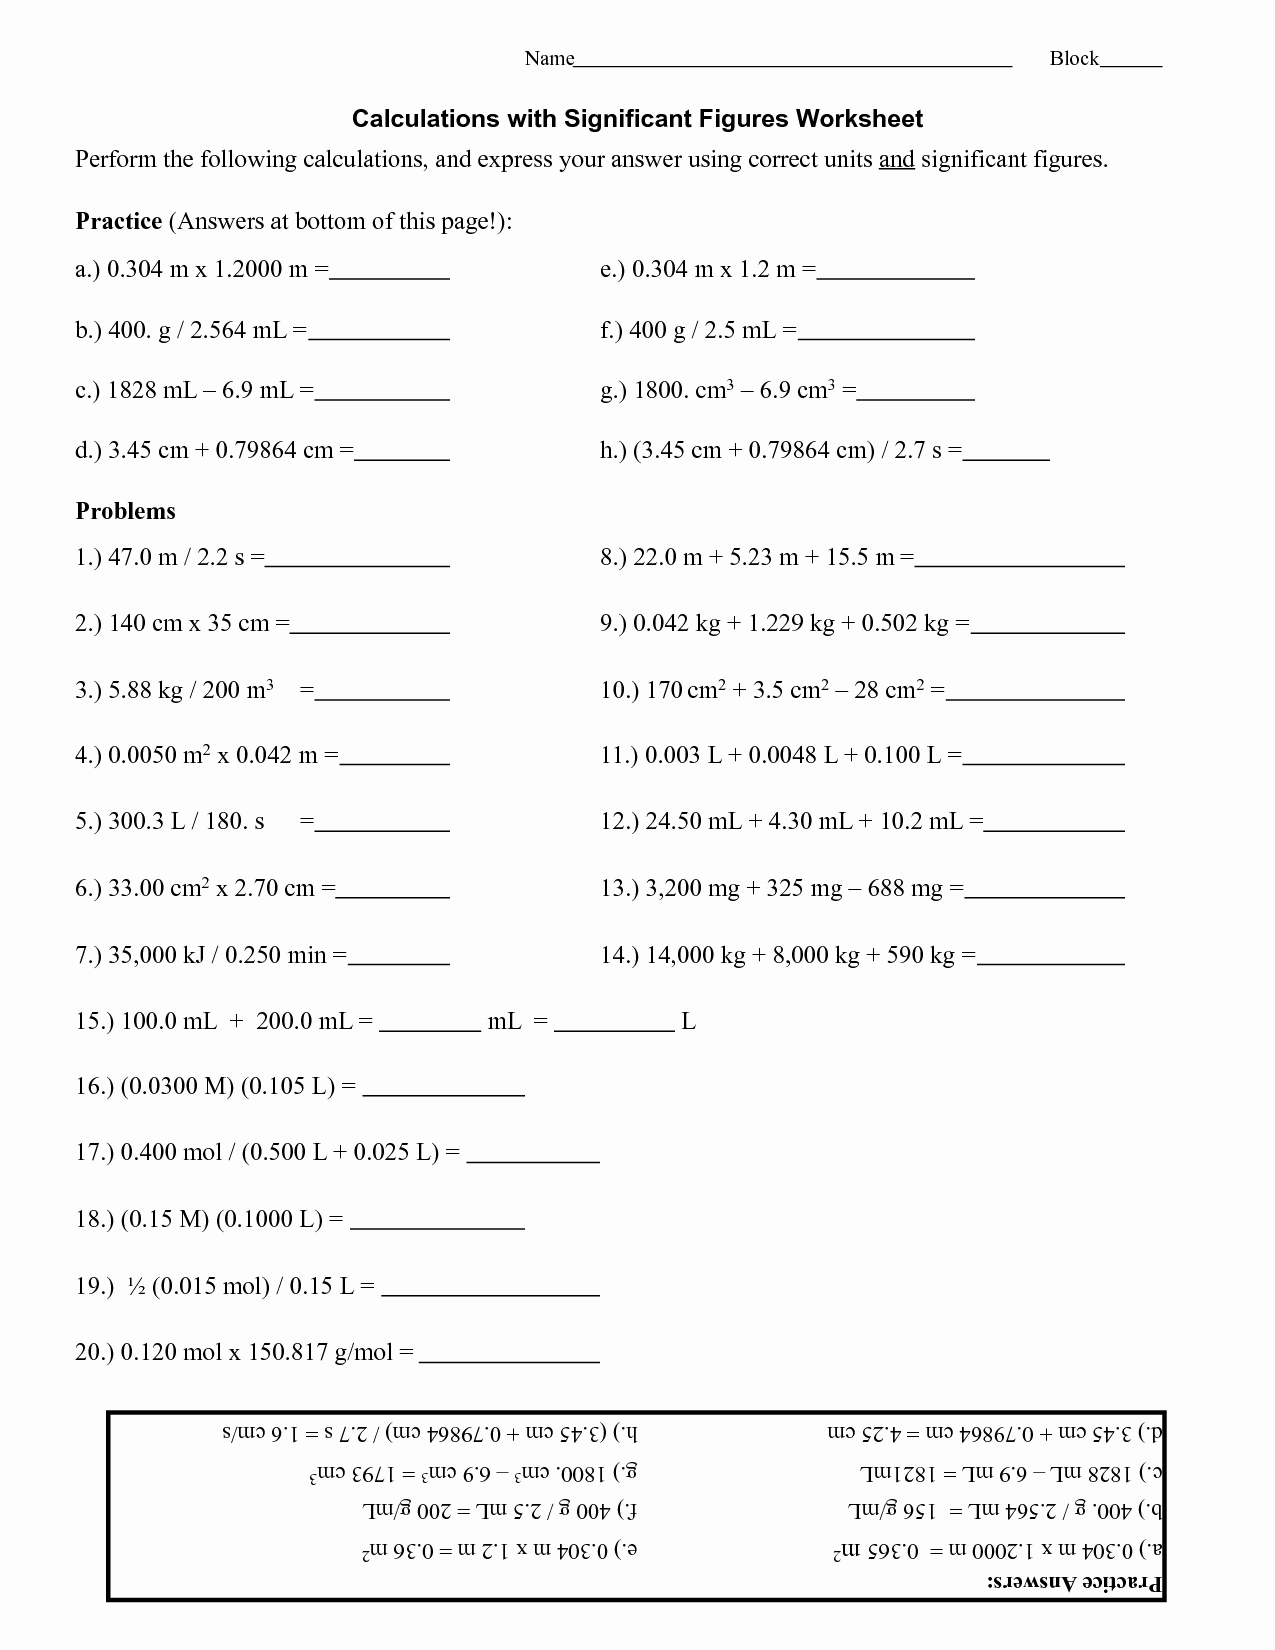 Significant Figures Worksheet Chemistry New 8 Best Of Significant Figures Worksheet with Answer